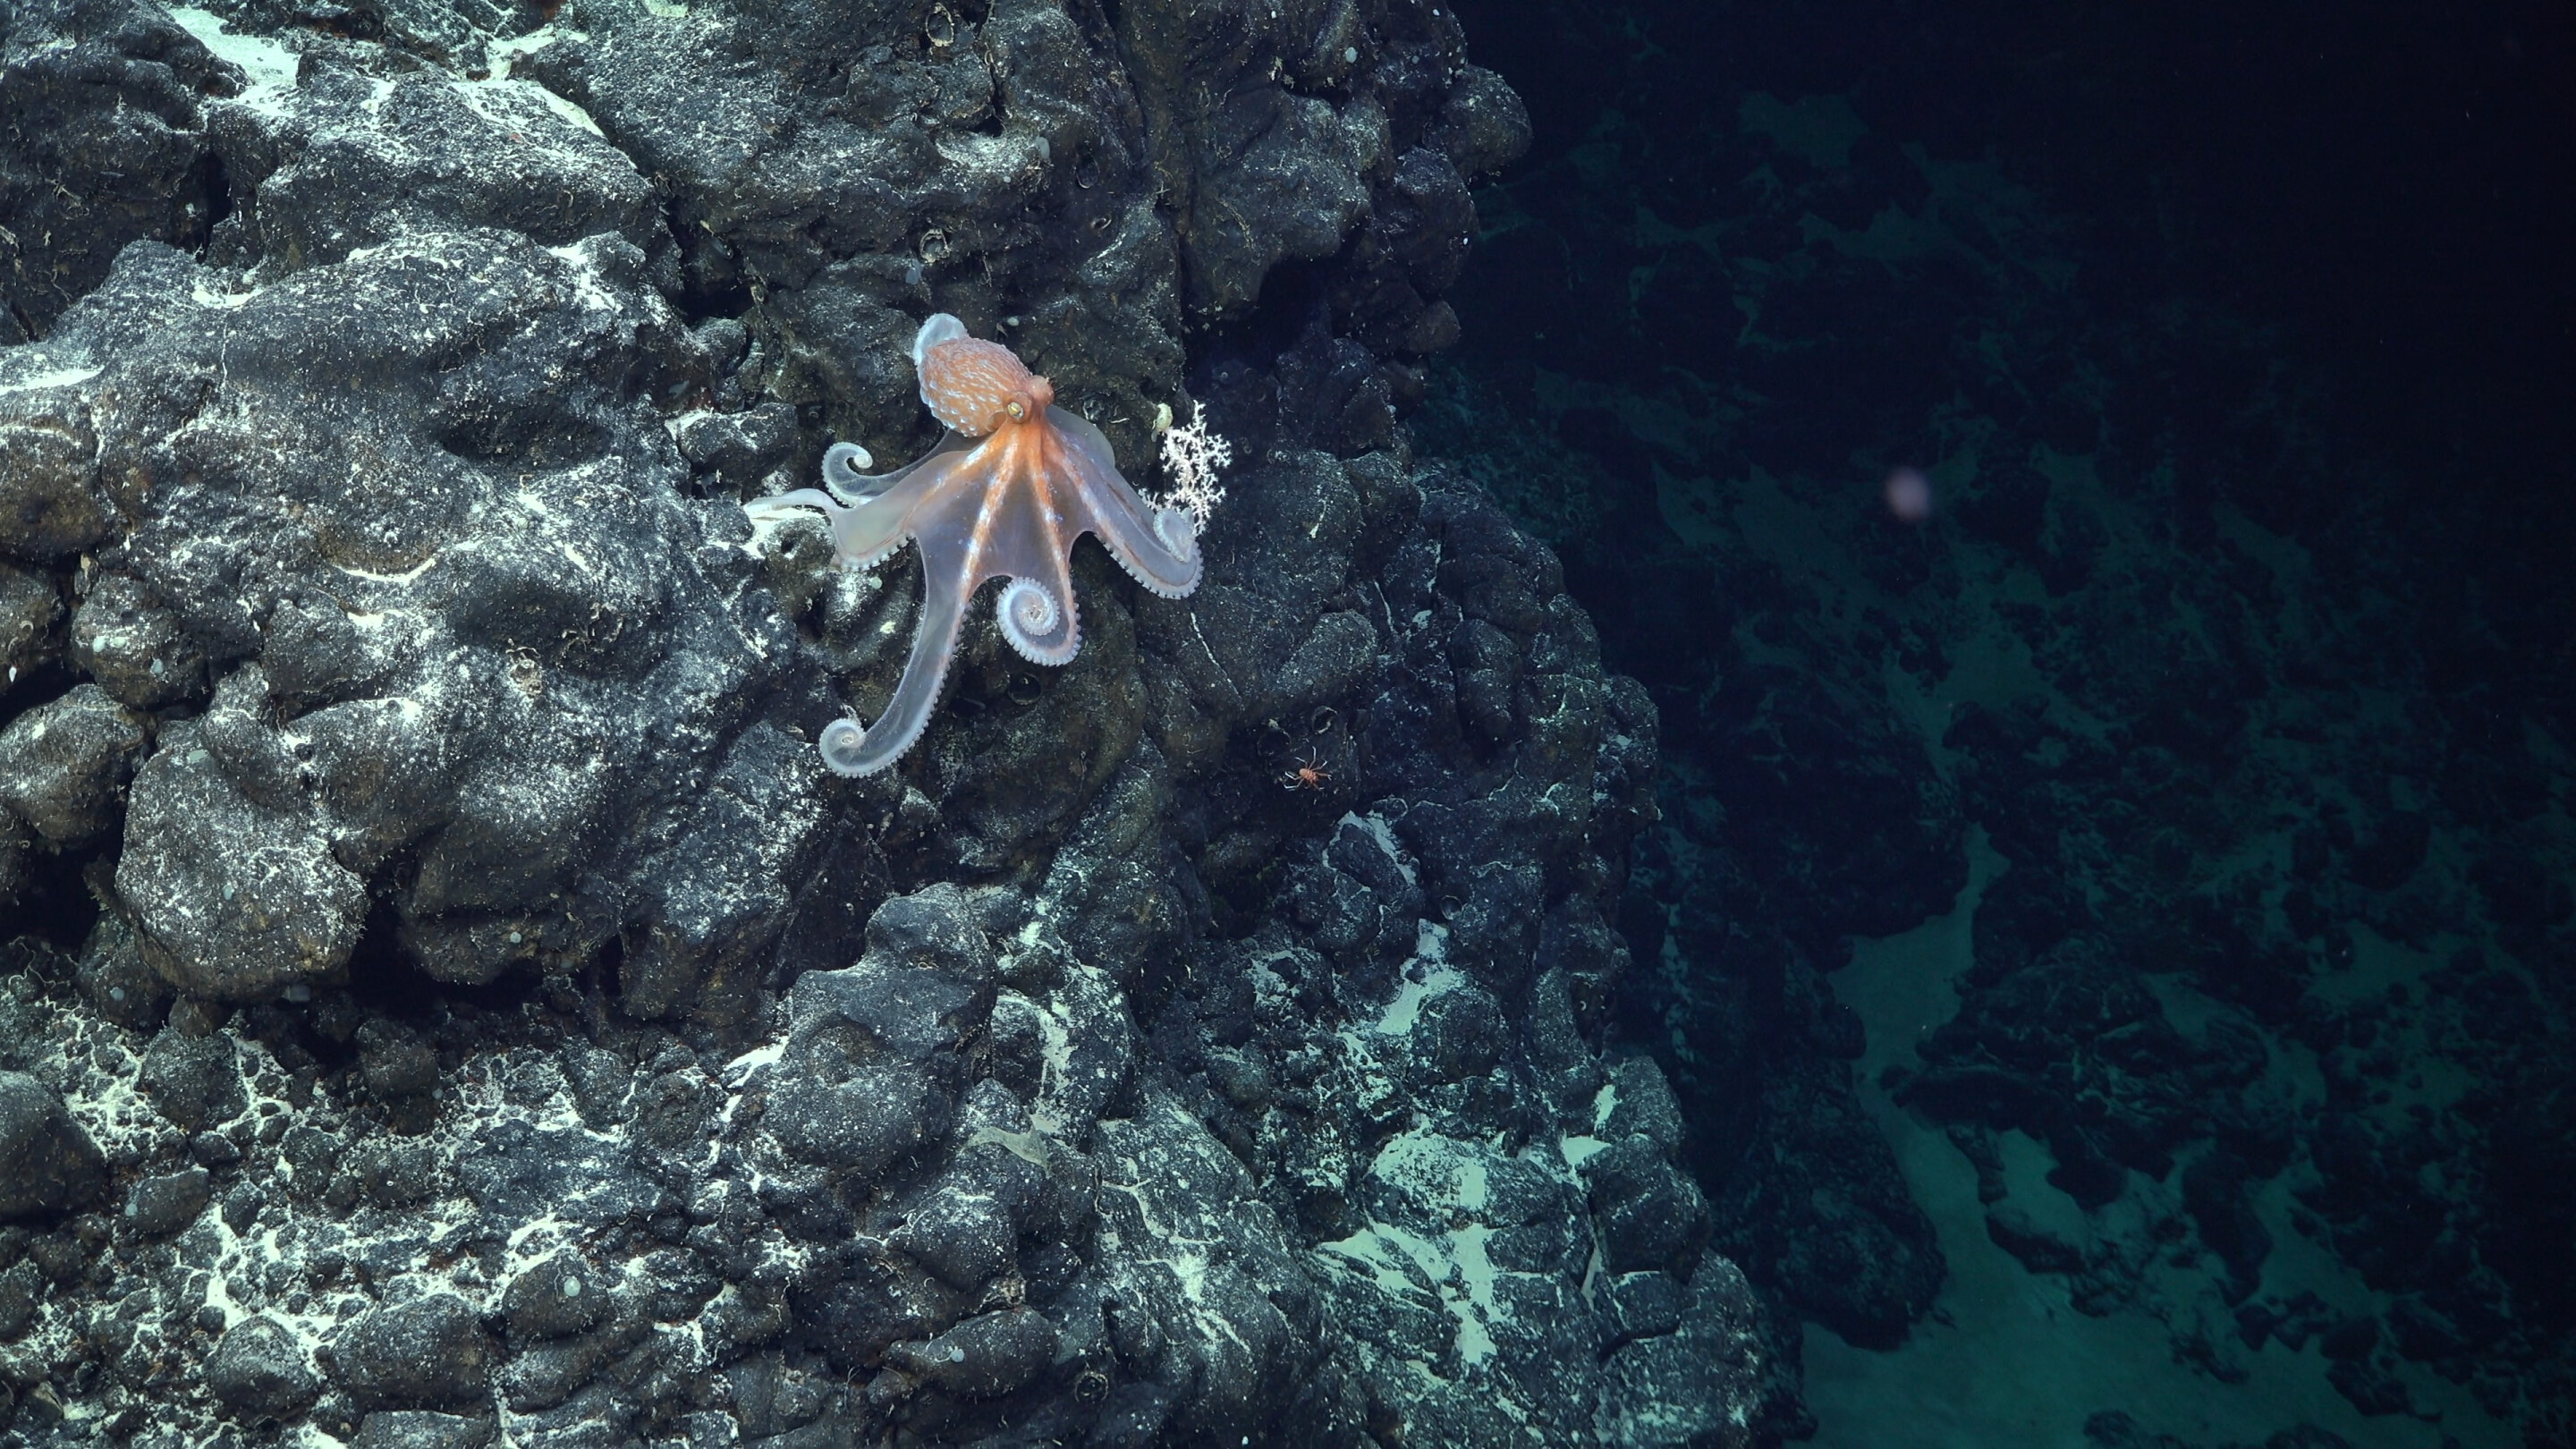 International research team discovers more than 50 new marine species